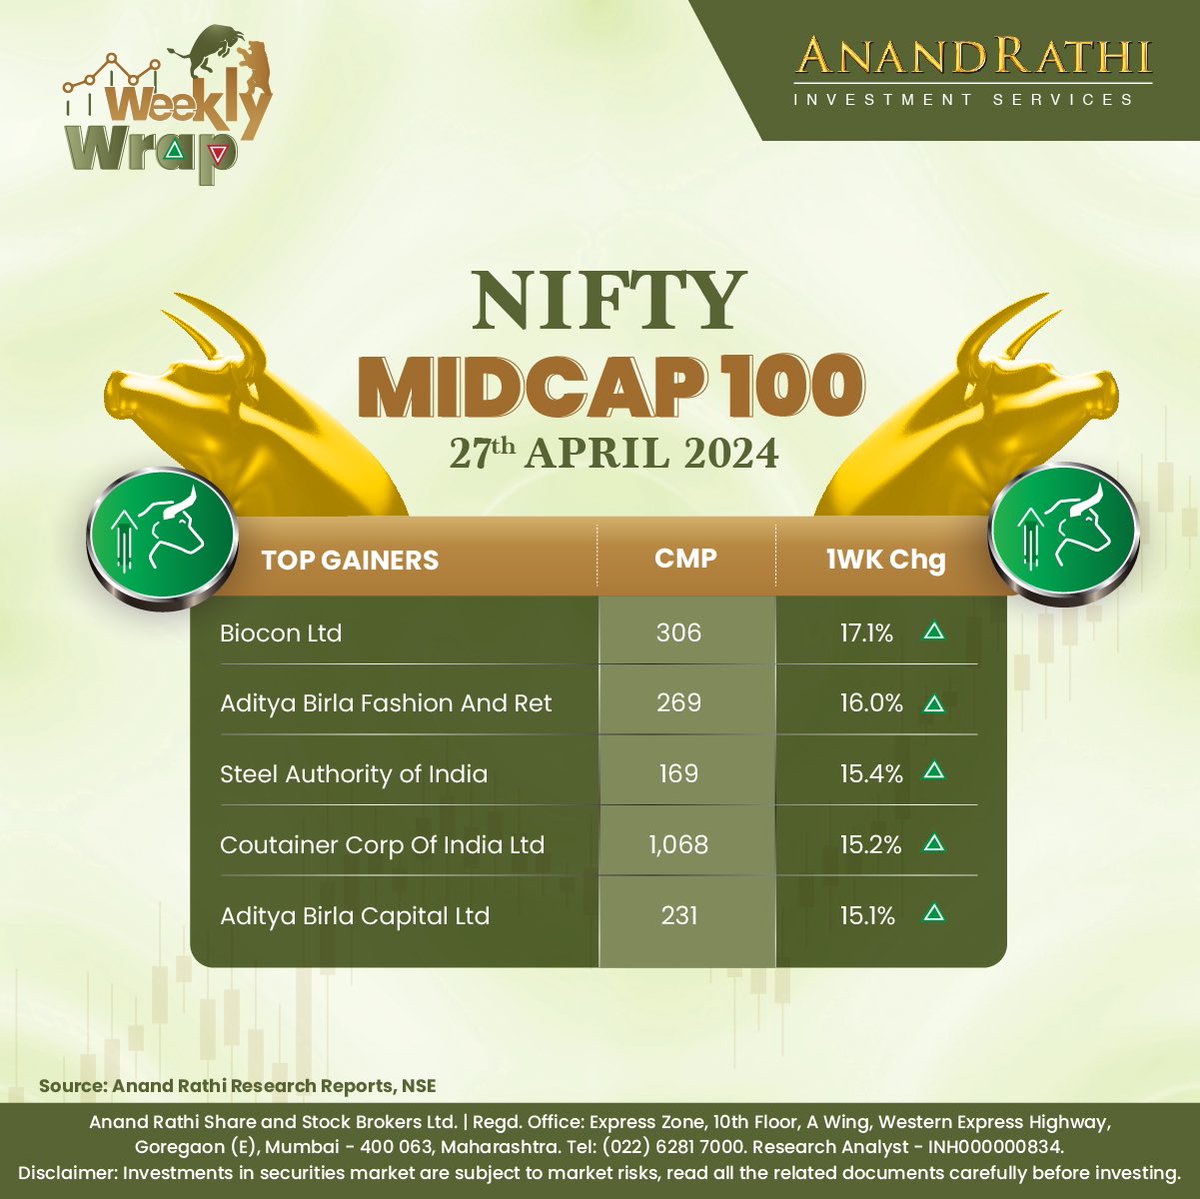 Take a glance at our Weekly Wrap - Nifty Midcap 100

Disclaimer - bit.ly/ARDisclaimerRe…

#WeeklyWrap #anandrathi #stockbroker #stockmarket #commodities #currencies #international #nifty #sensex